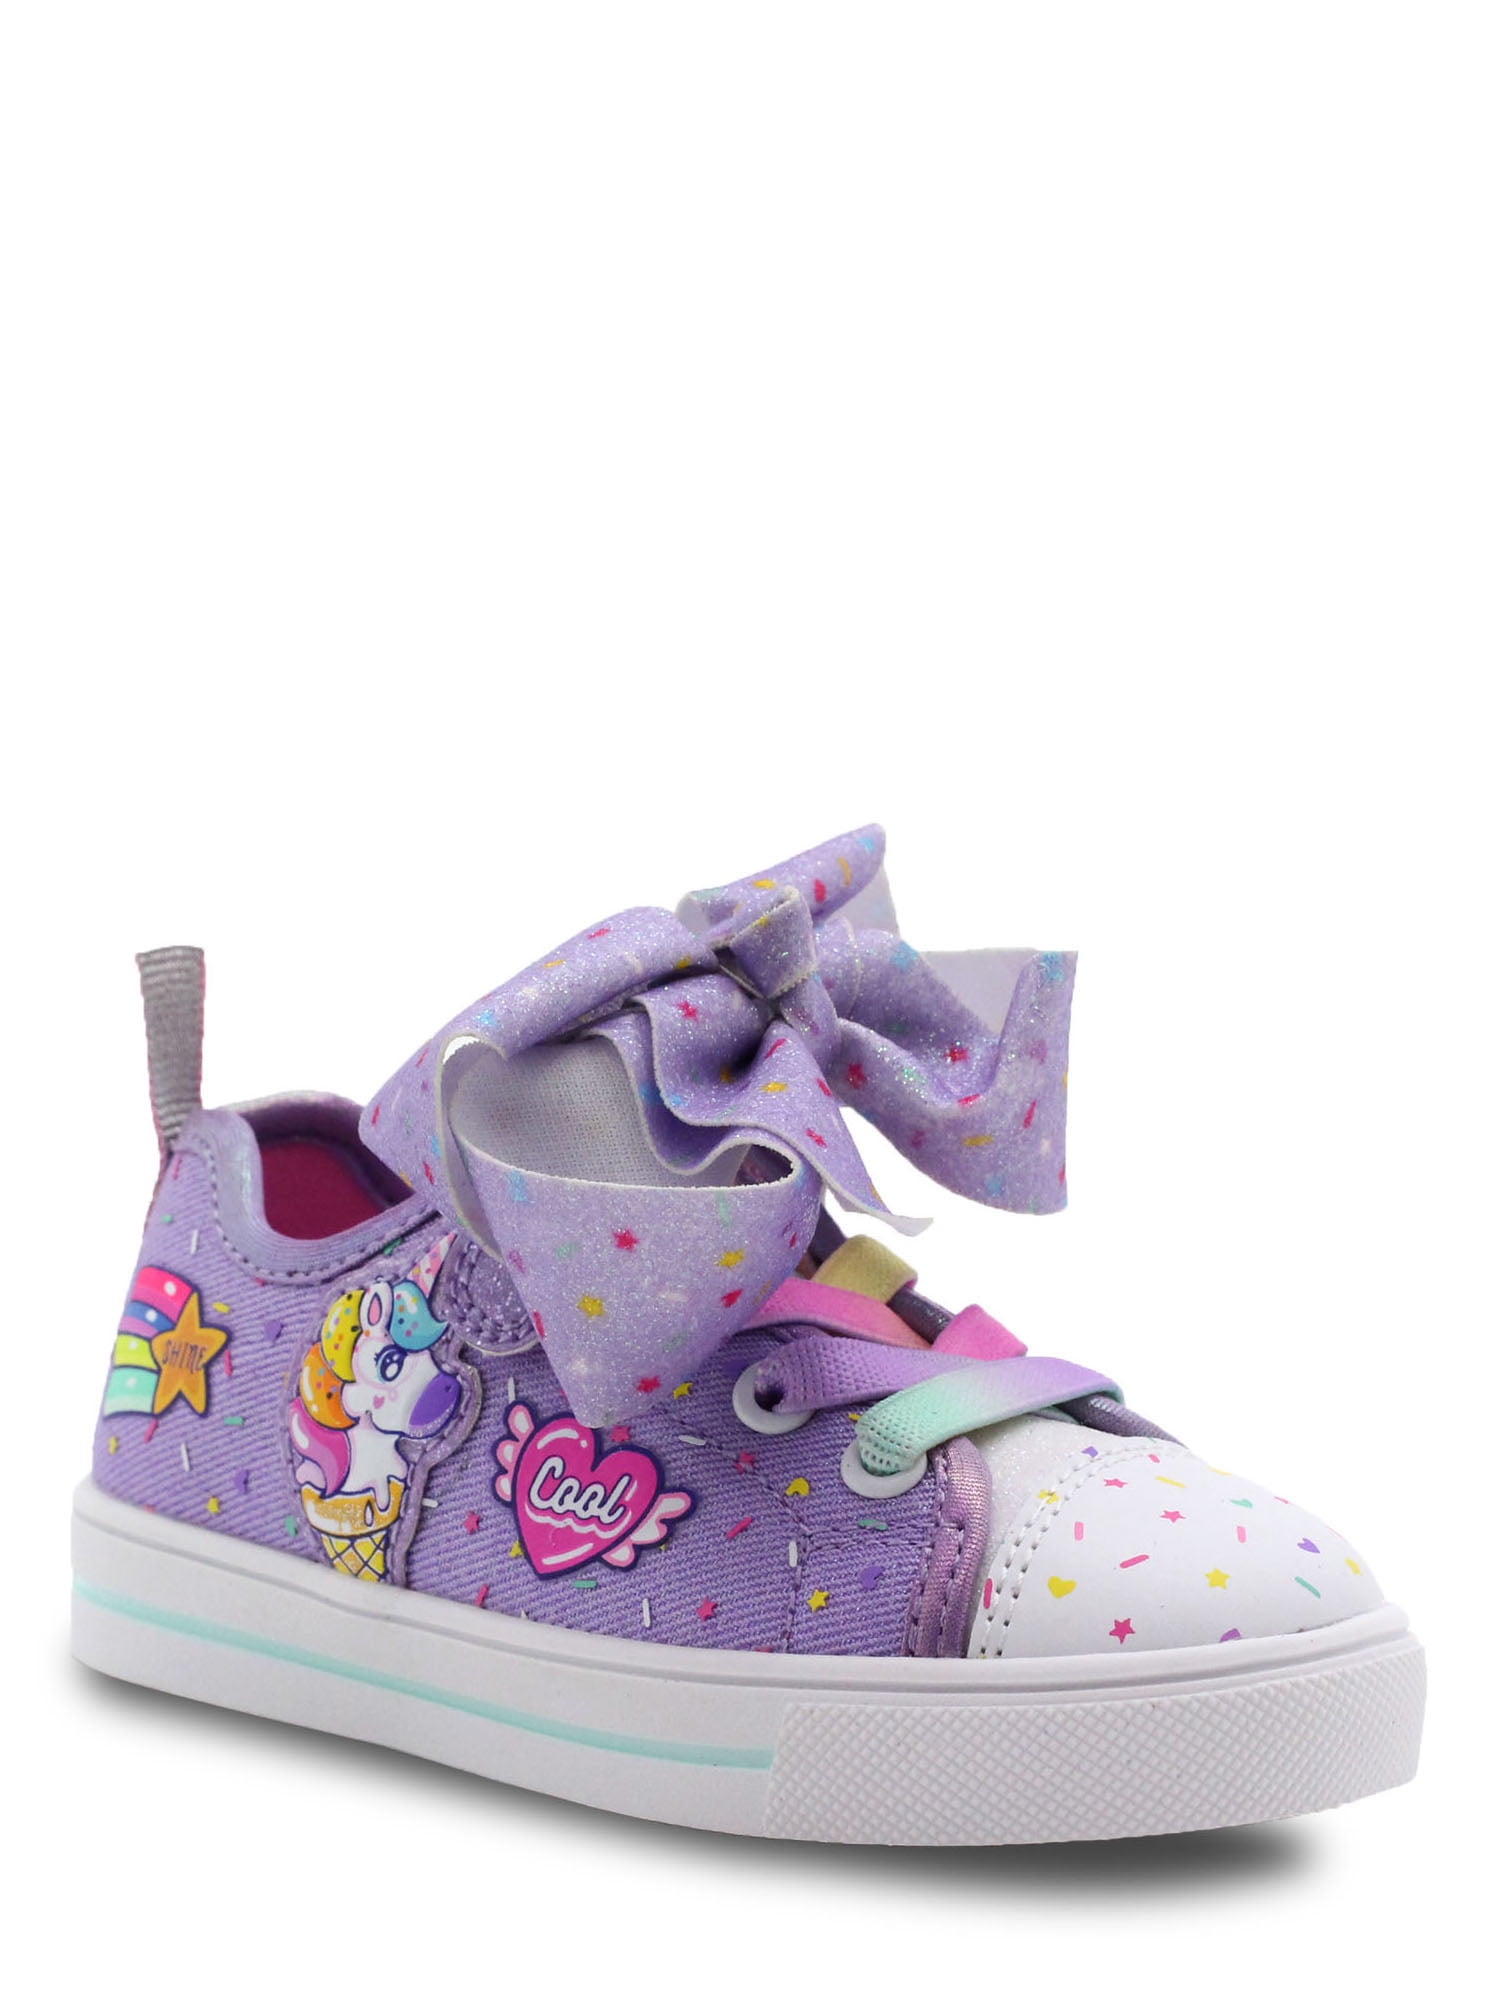 JoJo Siwa Girls Sneakers Athletic Style Shoes Pink Purple Bow Size 3 